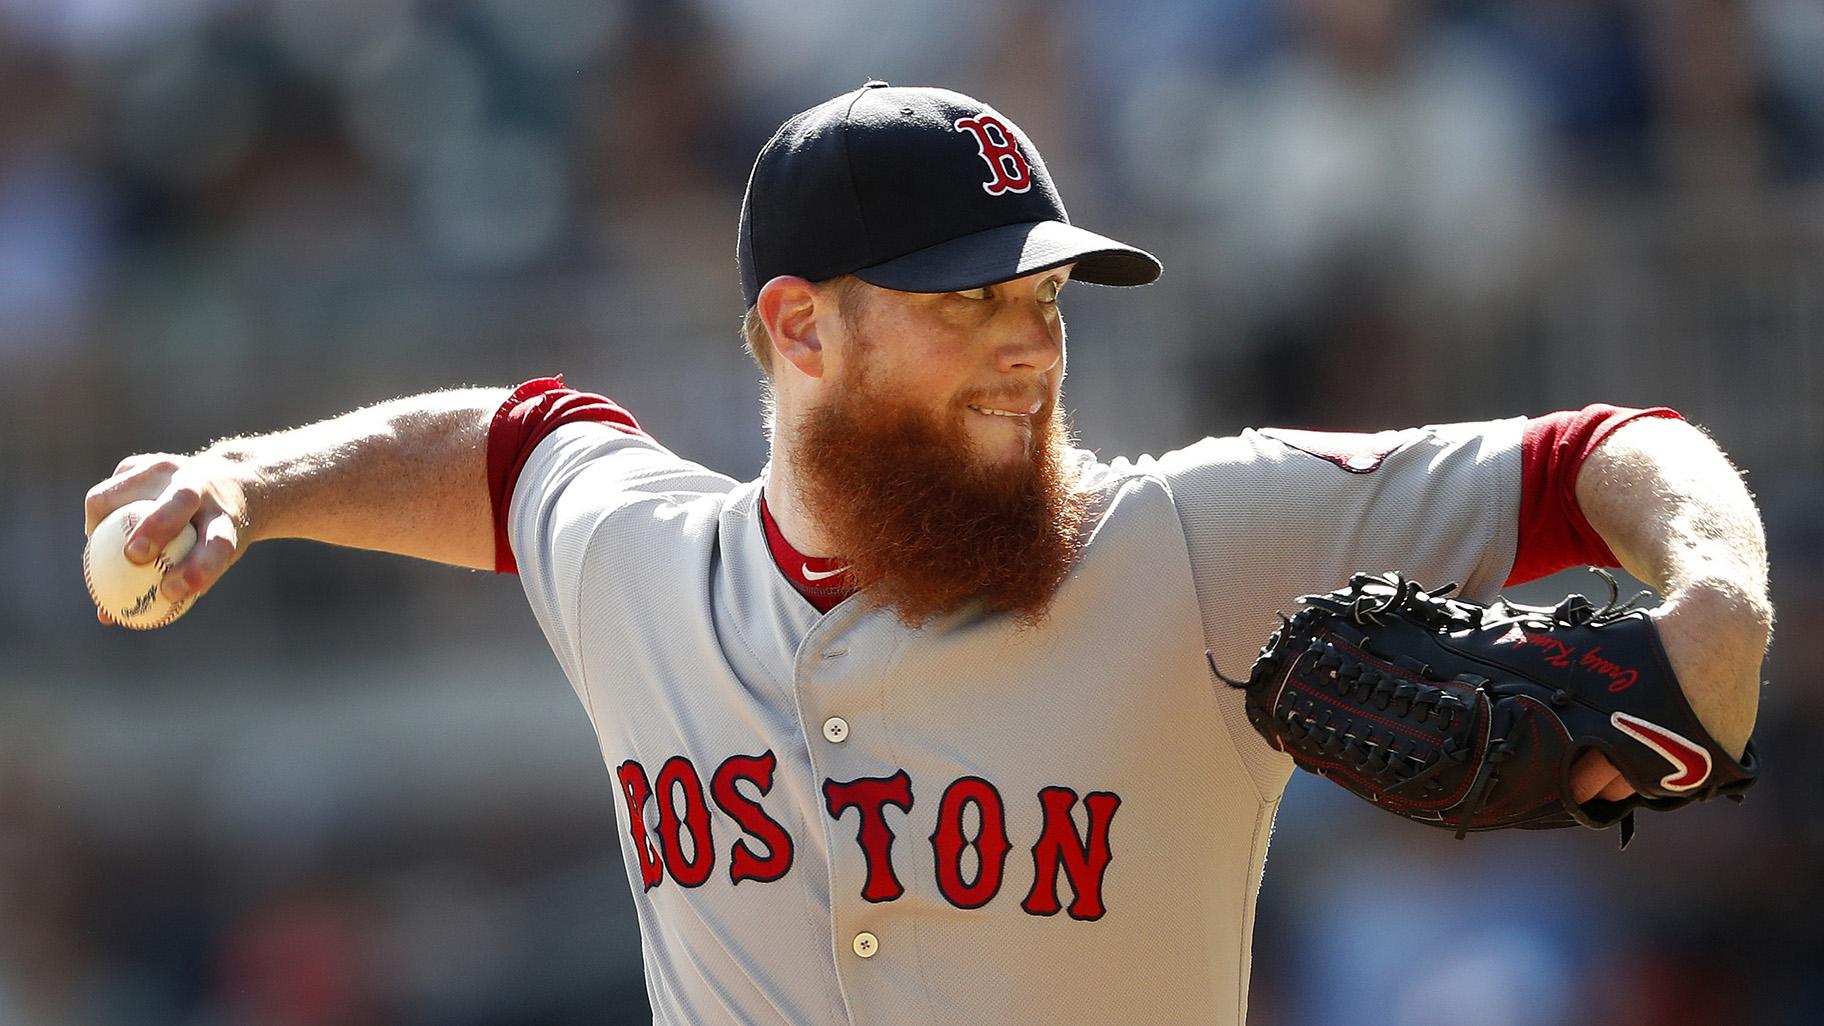 In this Sept. 3, 2018, file photo, Boston Red Sox relief pitcher Craig Kimbrel works against the Atlanta Braves in the ninth inning of baseball game, in Atlanta. (AP Photo / John Bazemore, File)